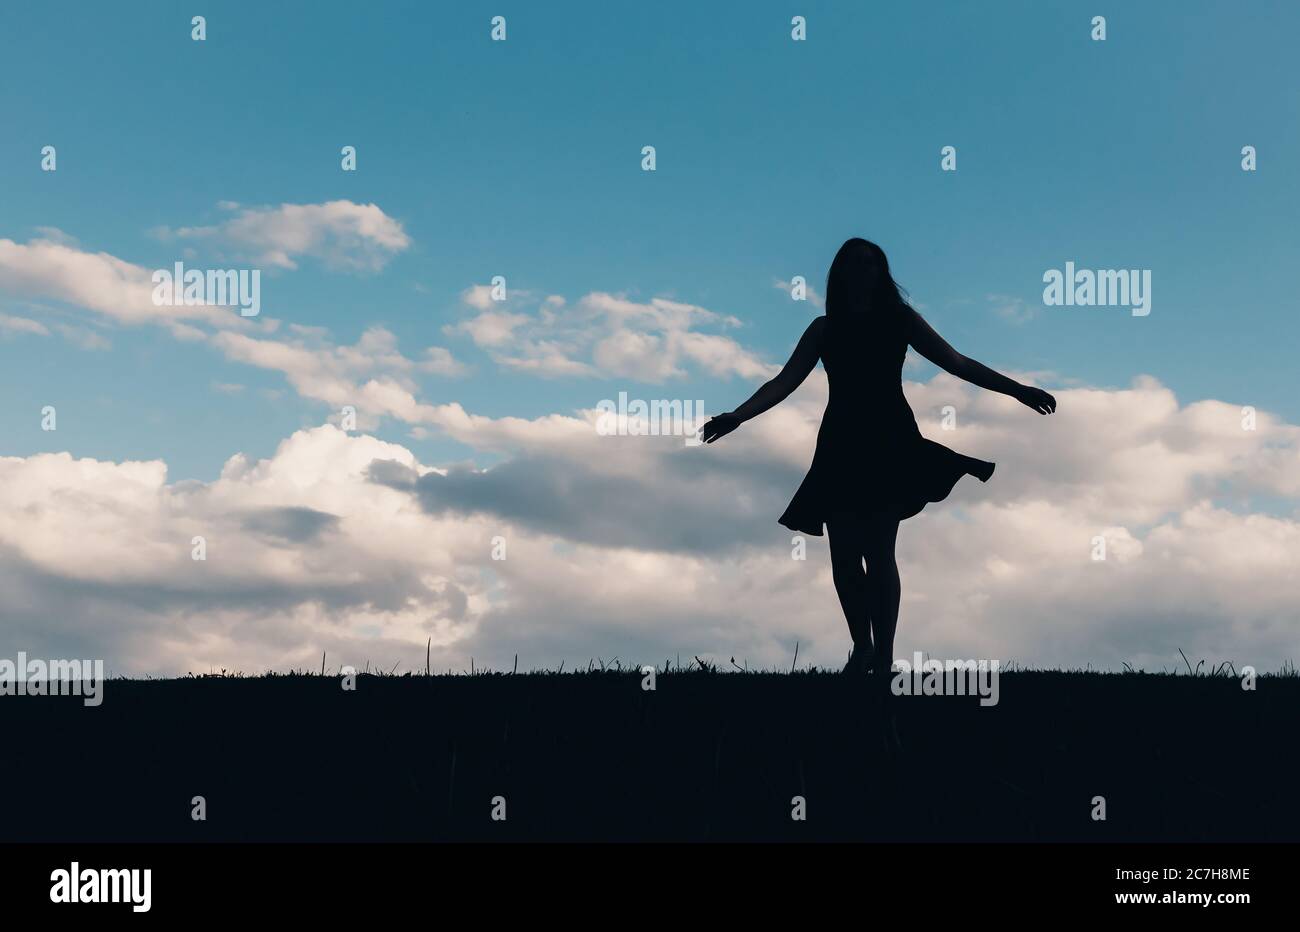 Silhouette of woman in a dress dancing against a blue sky with clouds. Stock Photo